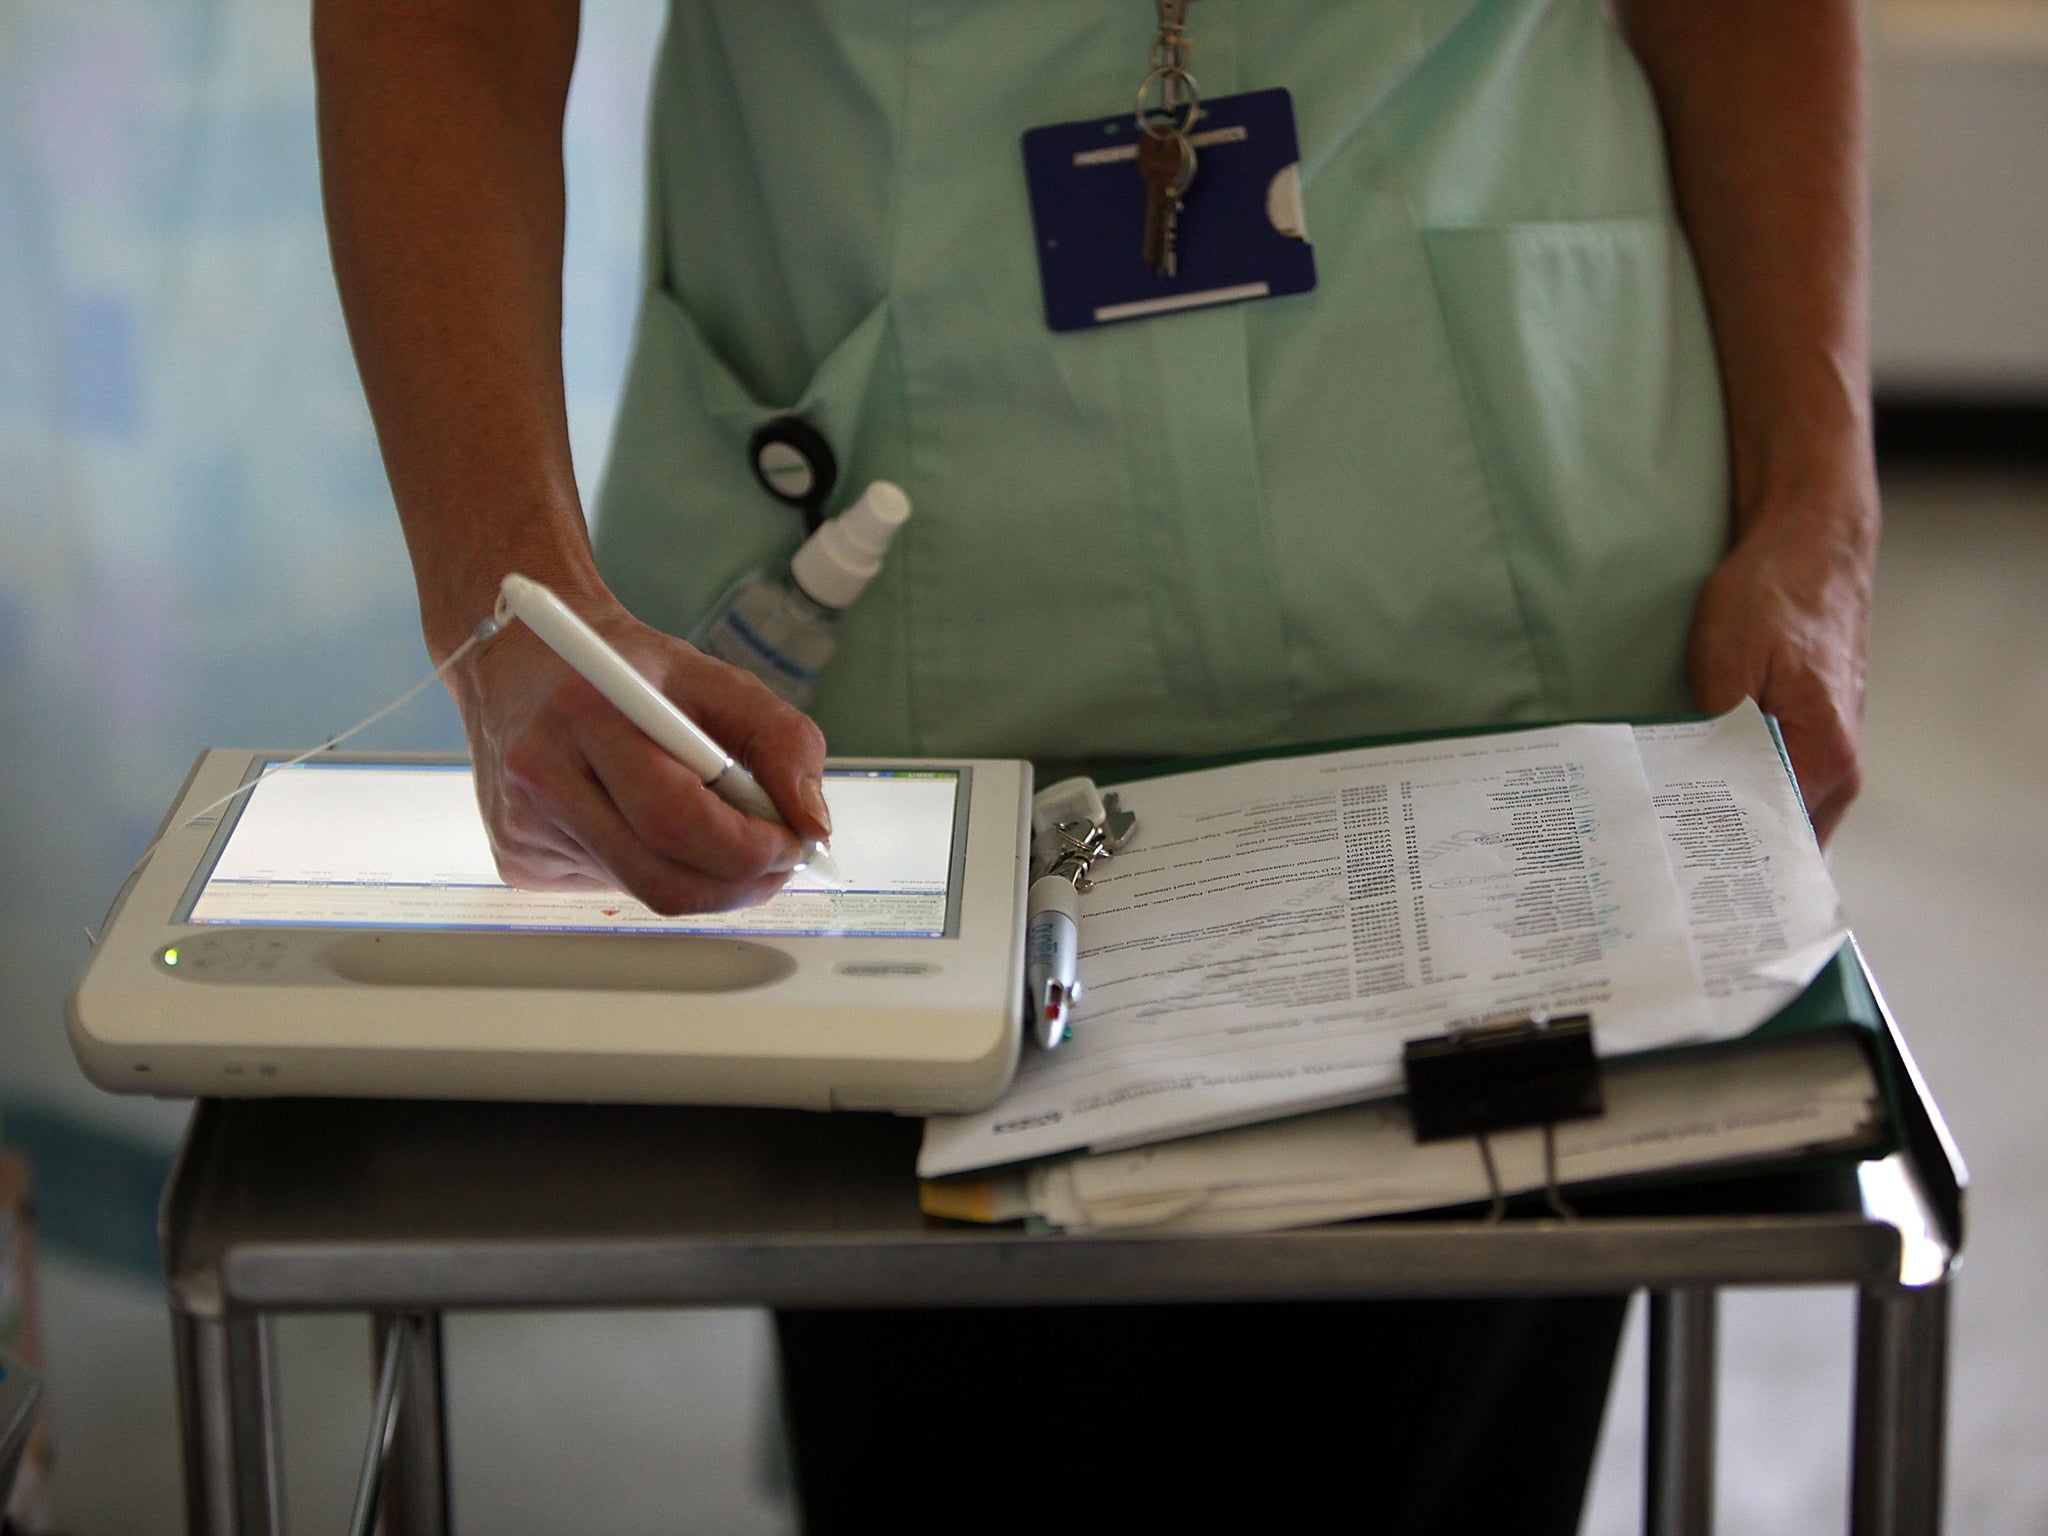 Nurses now must report and 'escalate' poor care to superiors